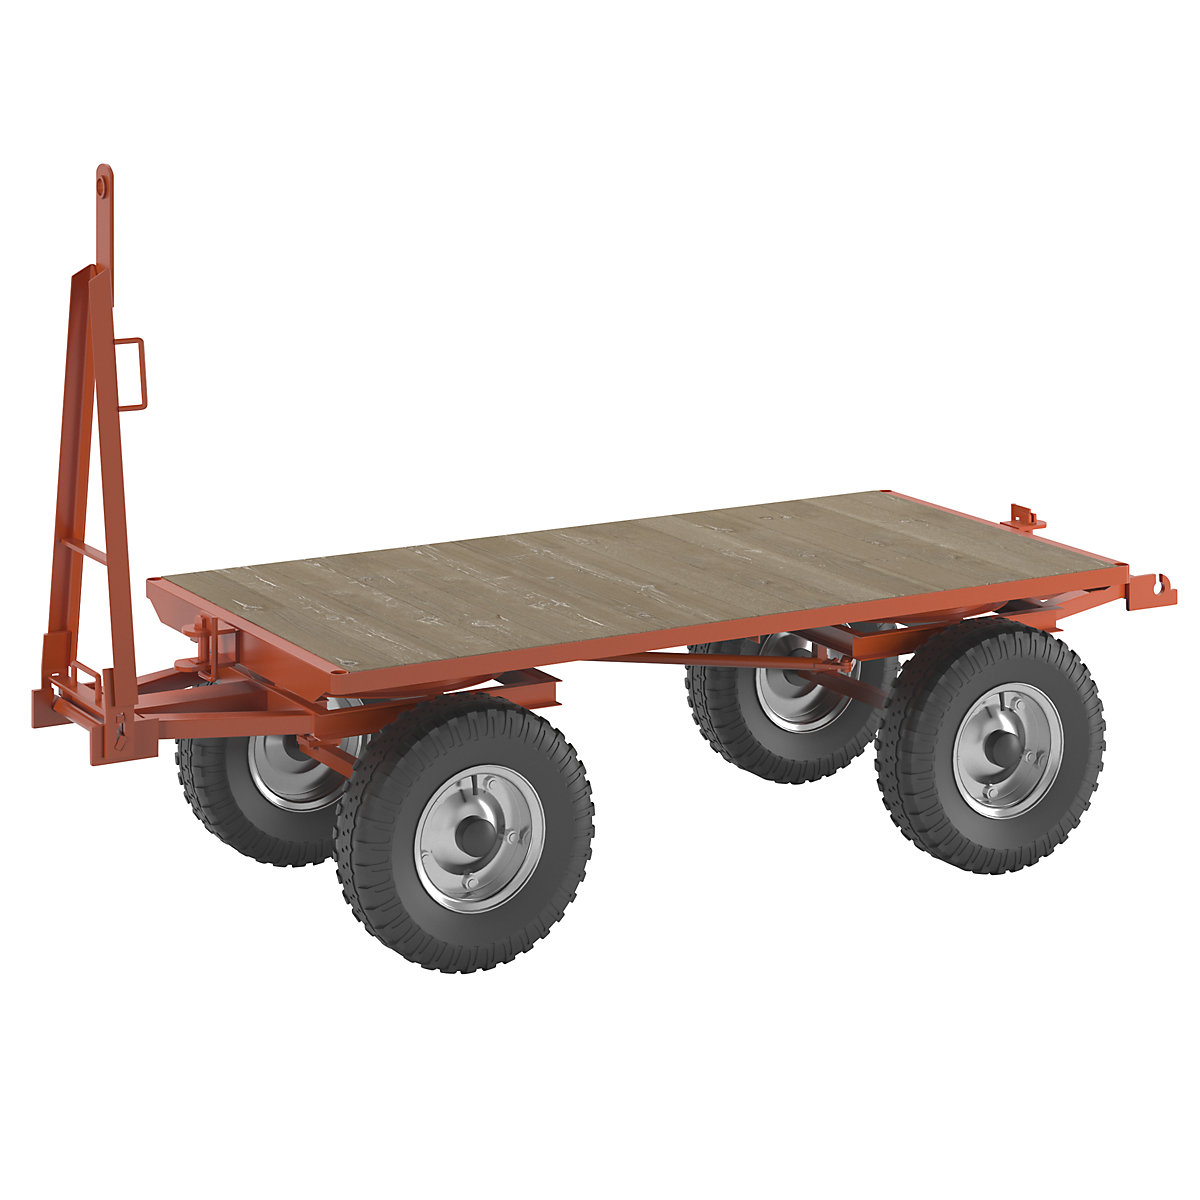 Trailer, 4-wheel double turntable steering, max. load 5 t, platform 2.0 x 1.0 m, pneumatic tyres-1